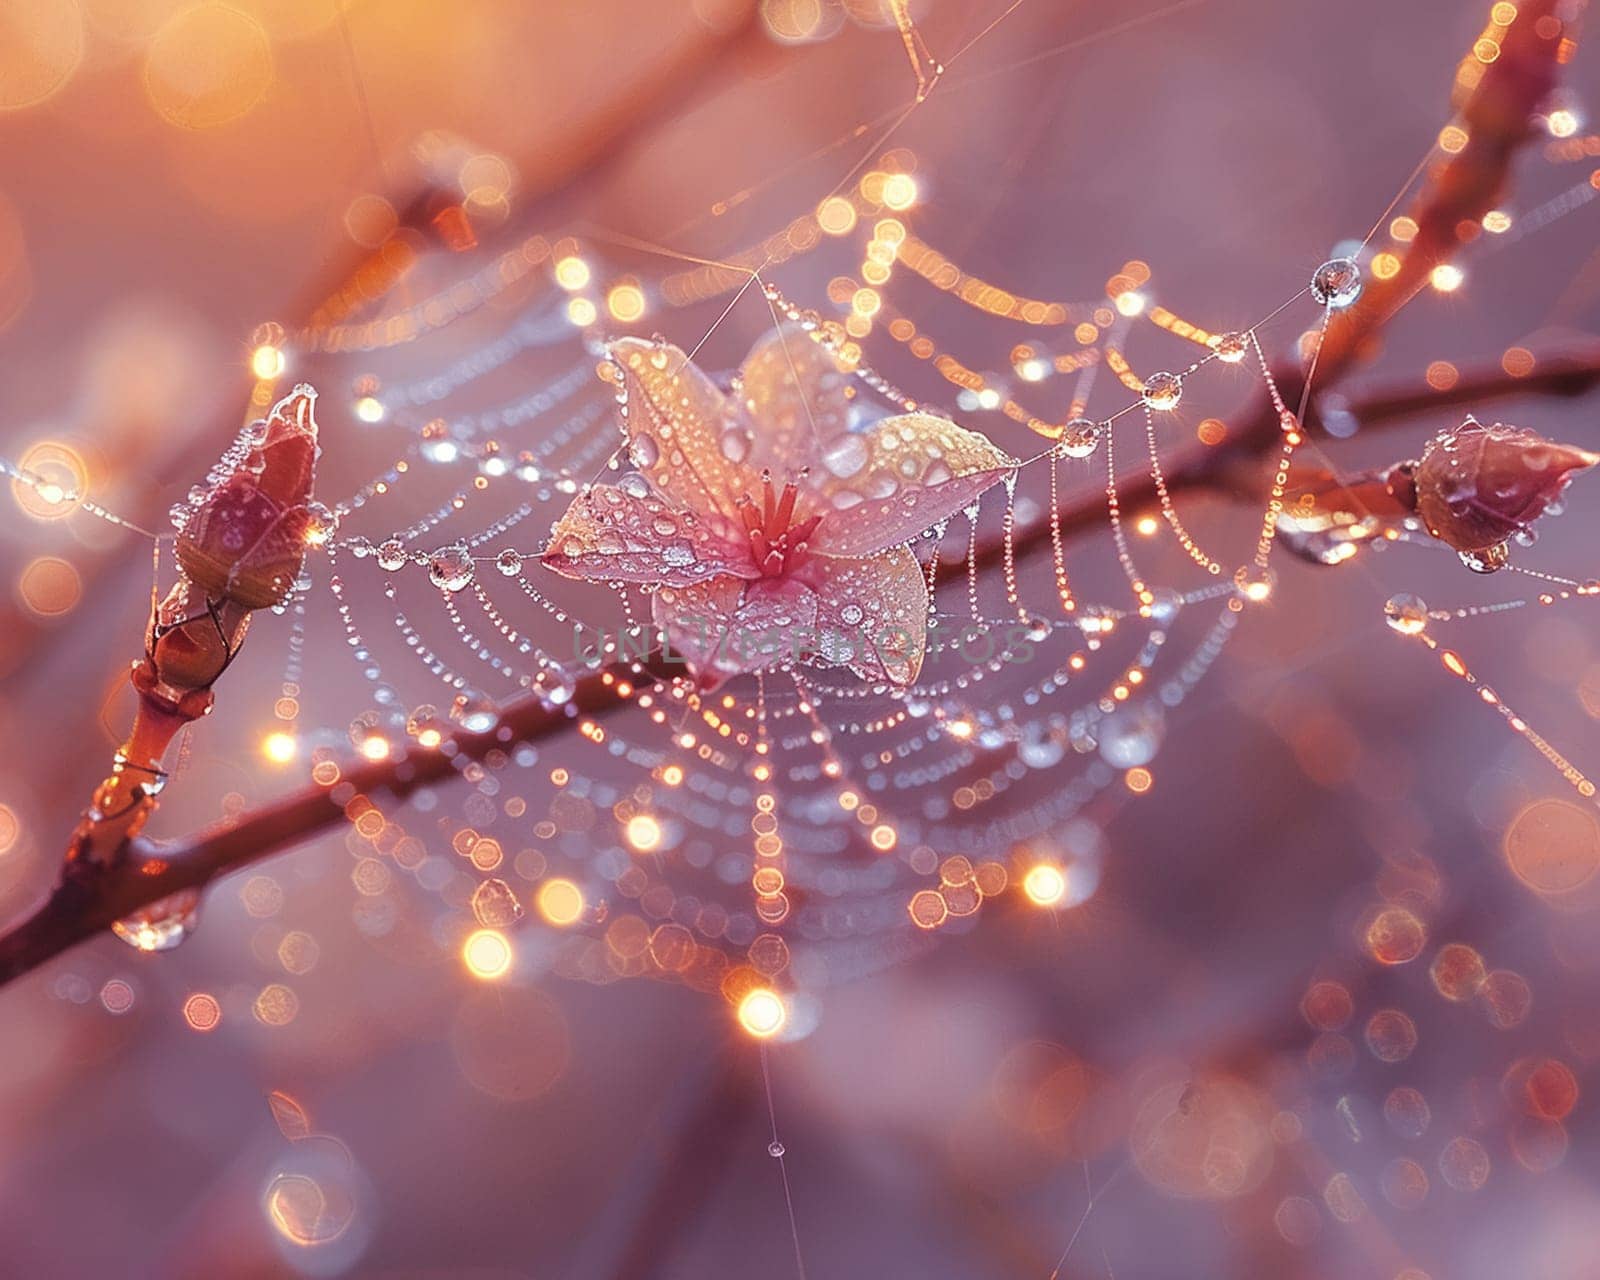 Glistening Raindrops on a Spiderweb at Dawn, The droplets blur with silk, the morning's delicate jewels suspended in time.